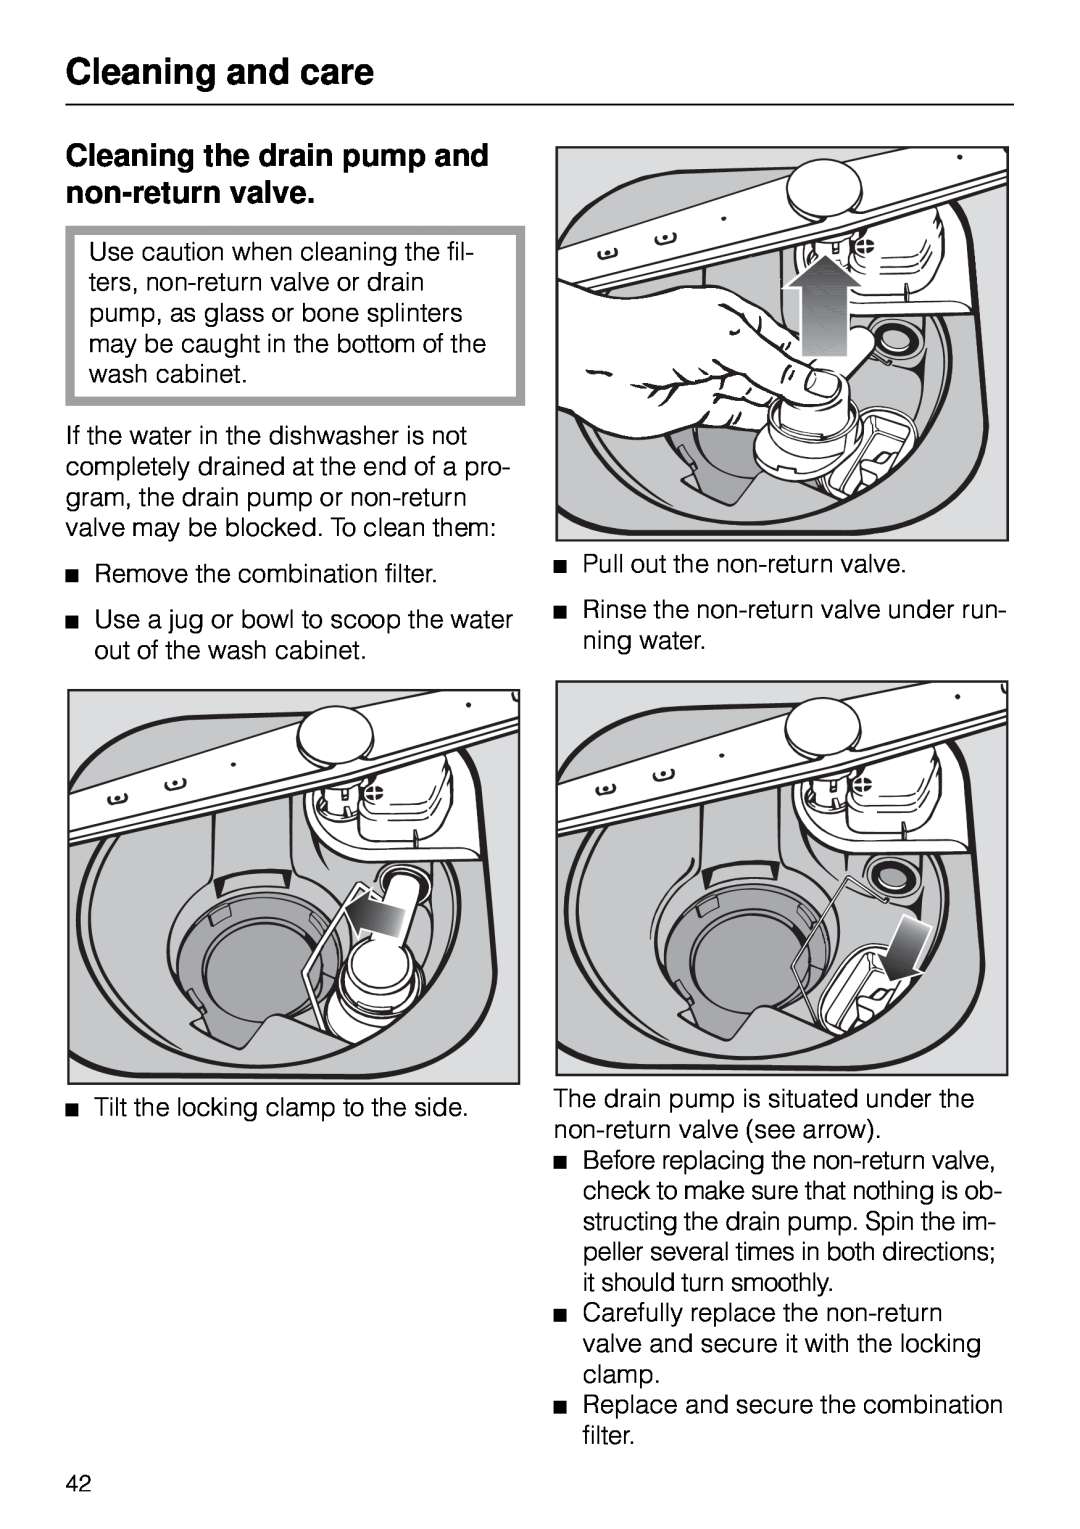 Miele G 890 manual Cleaning and care, Cleaning the drain pump and non-returnvalve 